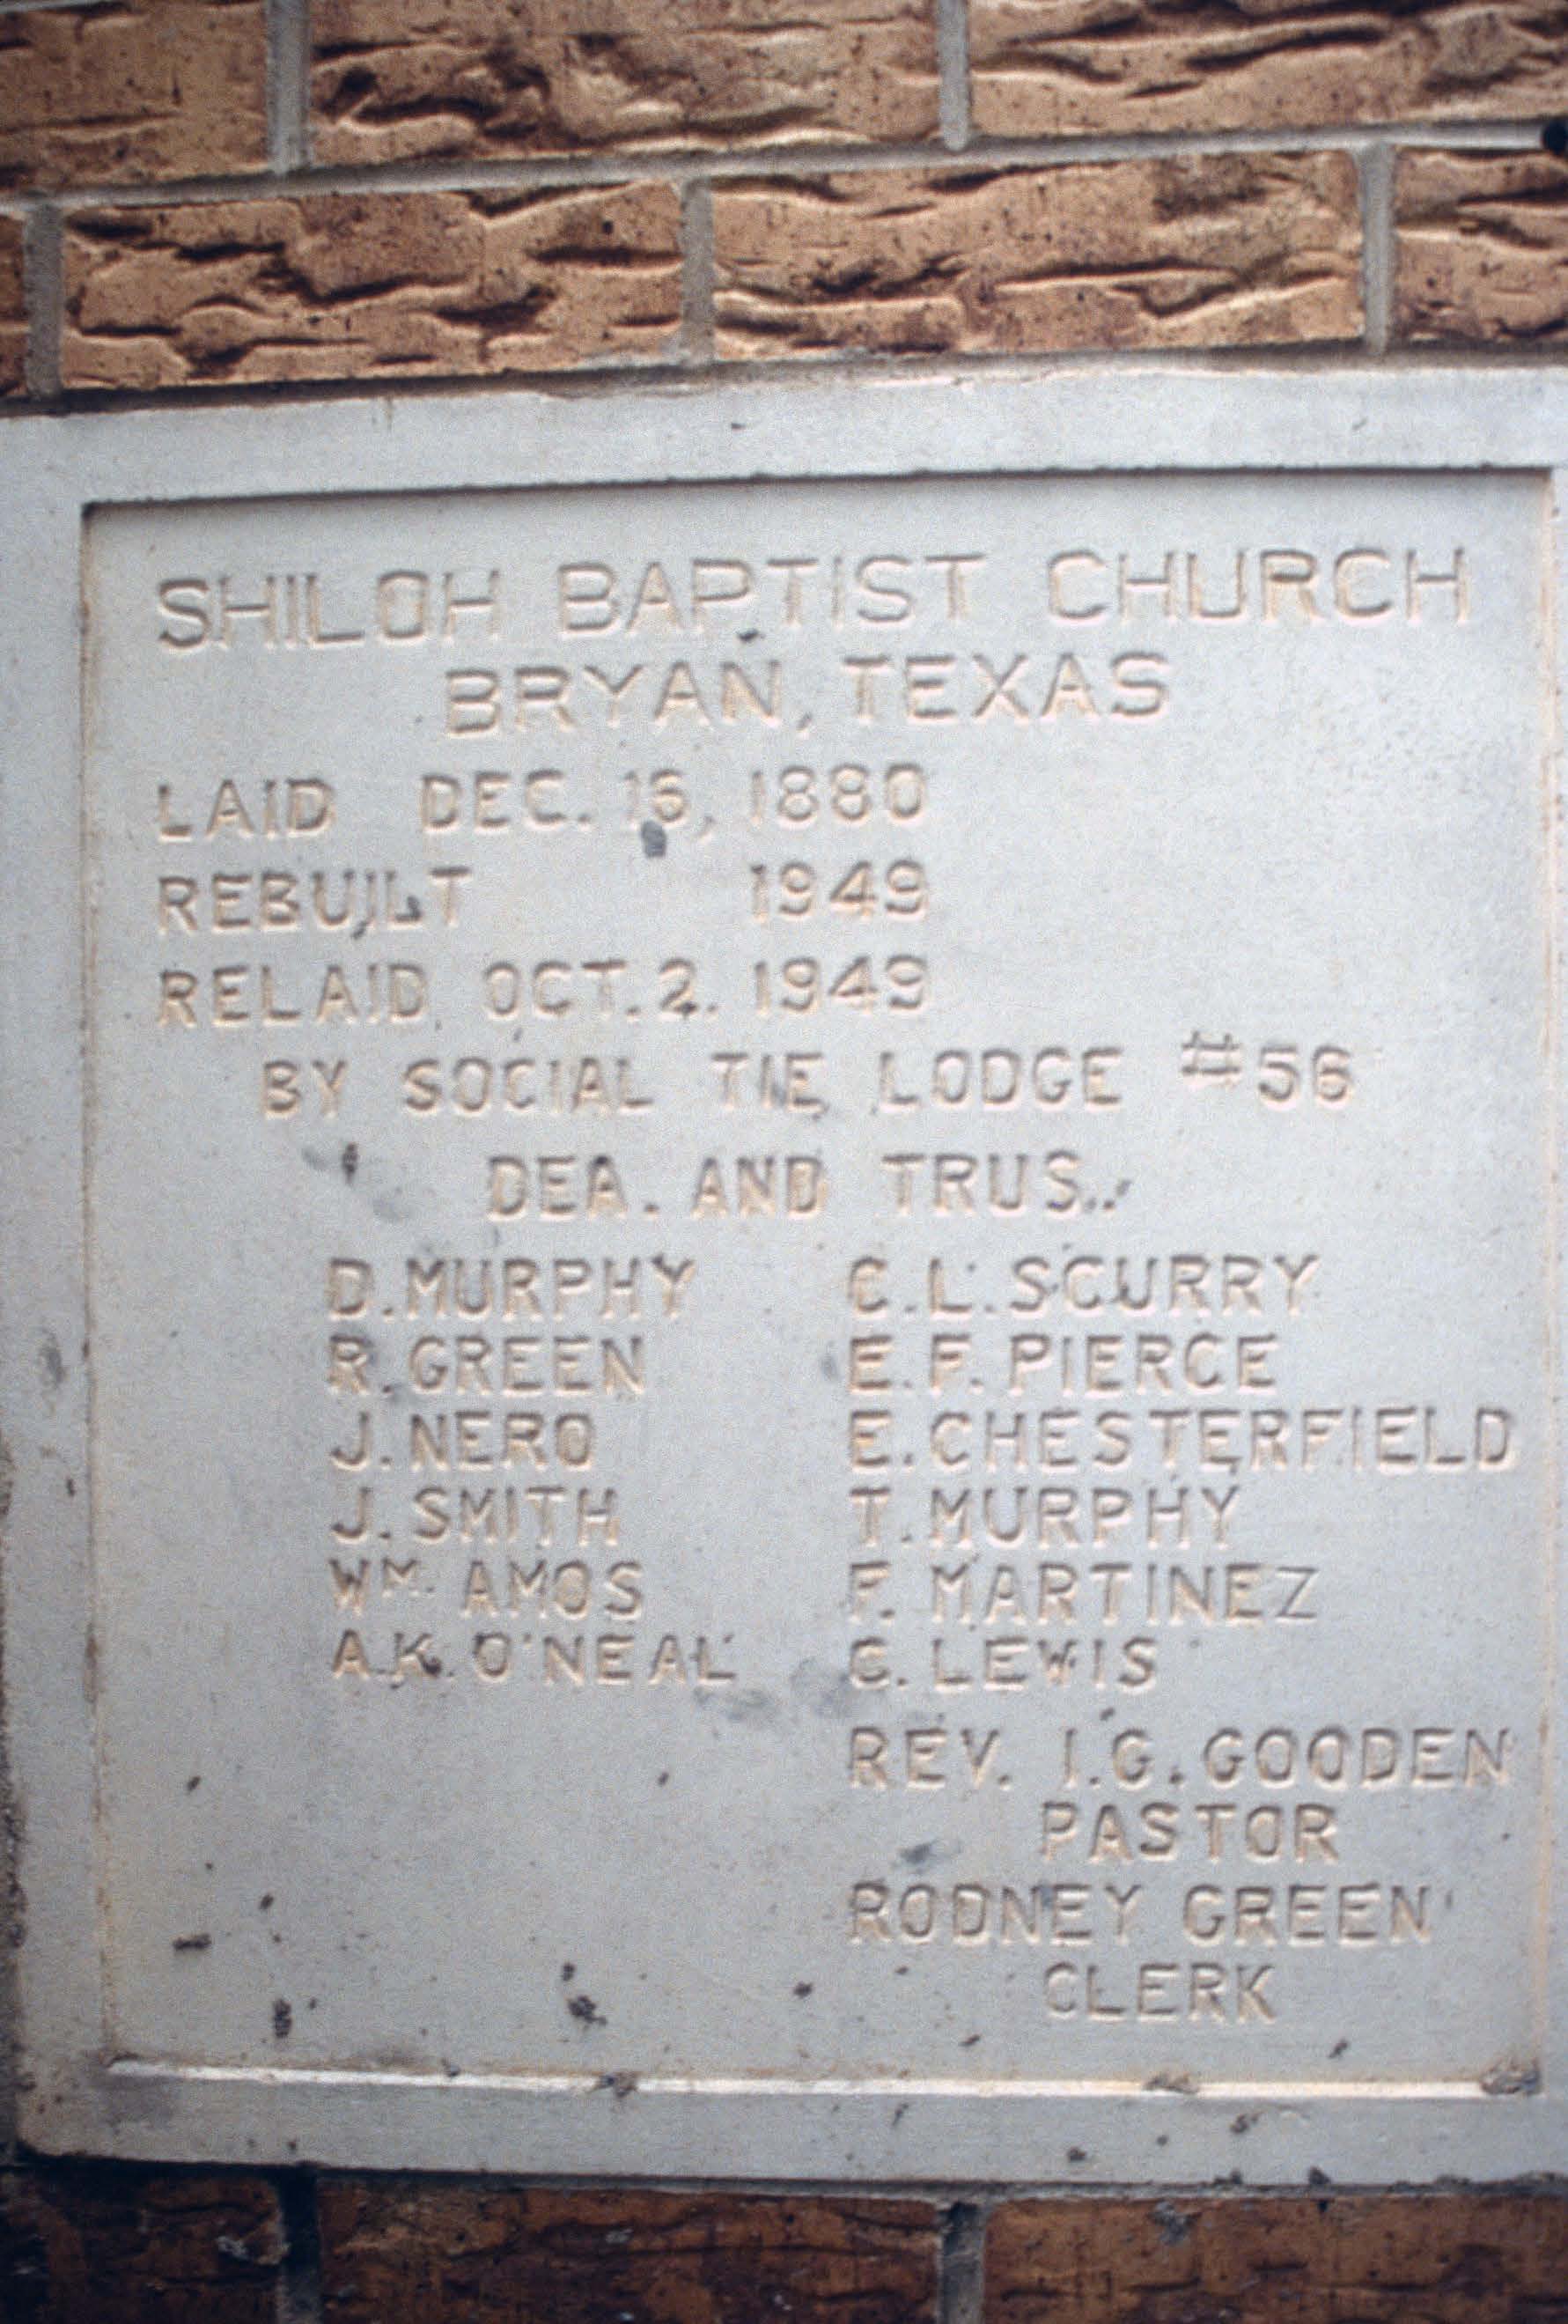 Photo of the cornerstone of the Shiloh Baptist Church in Bryan, Texas.